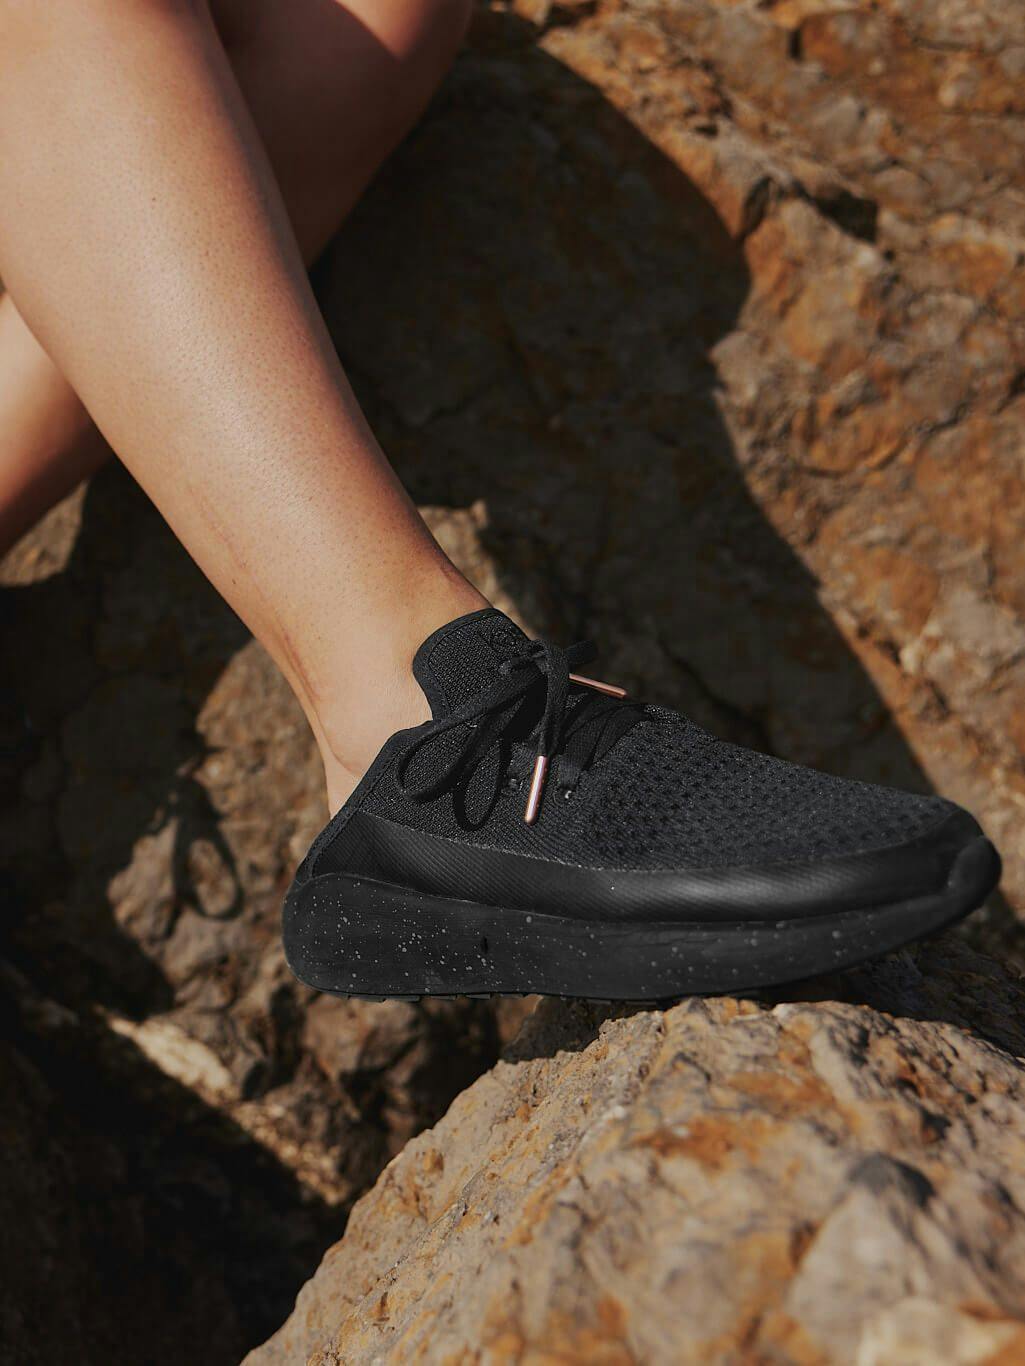 Flexible and functional, these sneakers are designed to keep up with all your summer activities. Wear them as classic sneakers or step on the heel for an easy slip-on option.